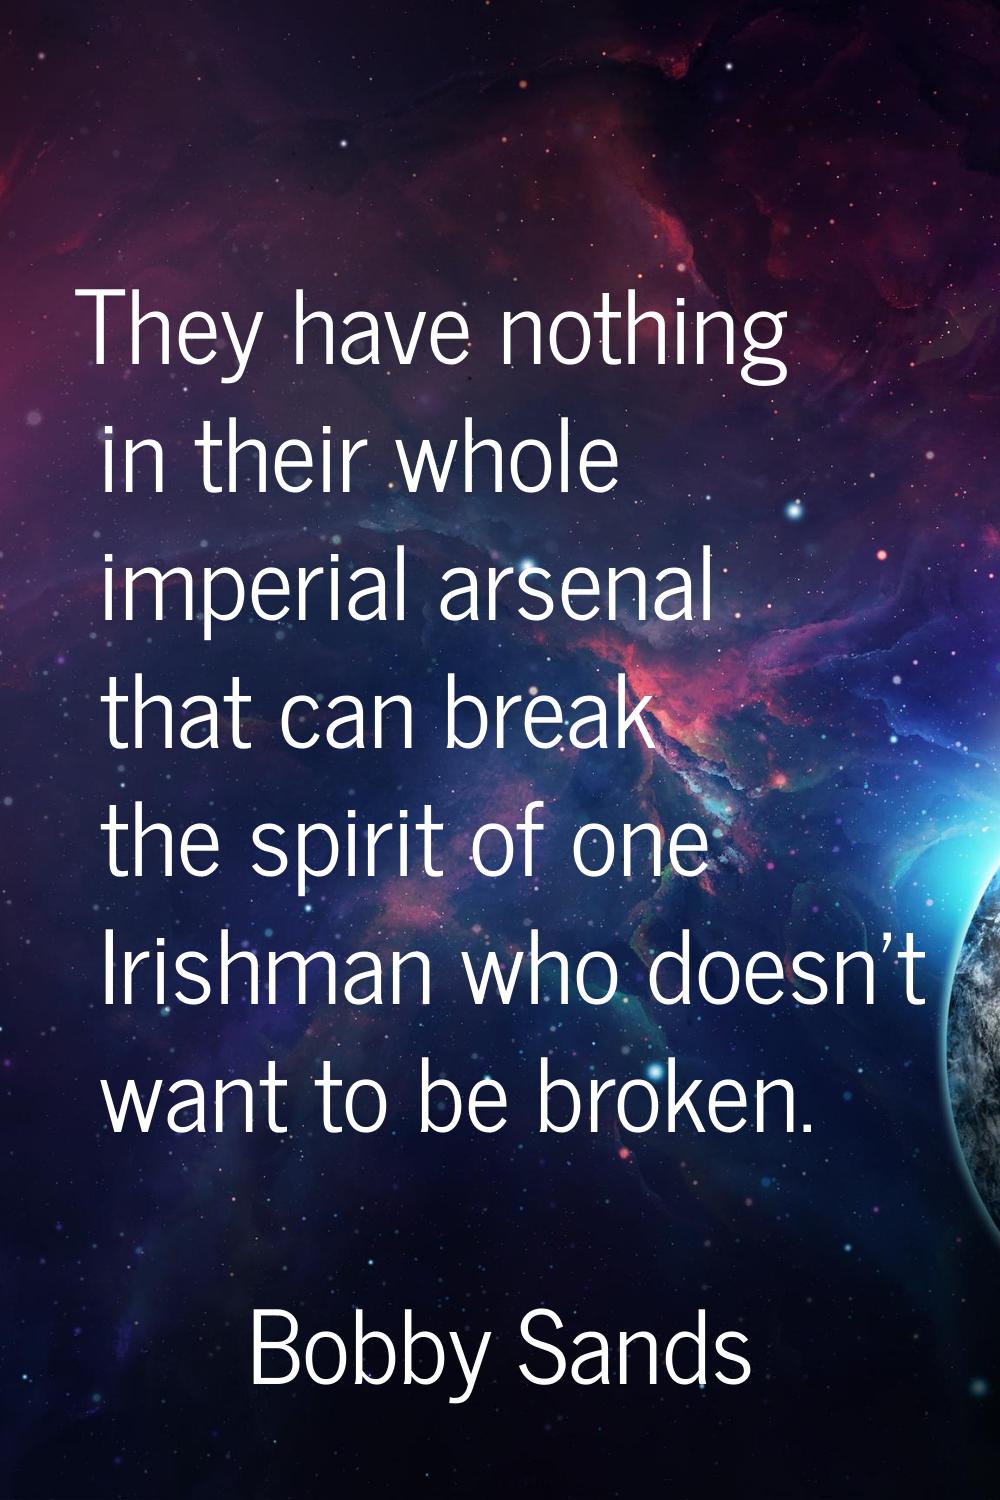 They have nothing in their whole imperial arsenal that can break the spirit of one Irishman who doe